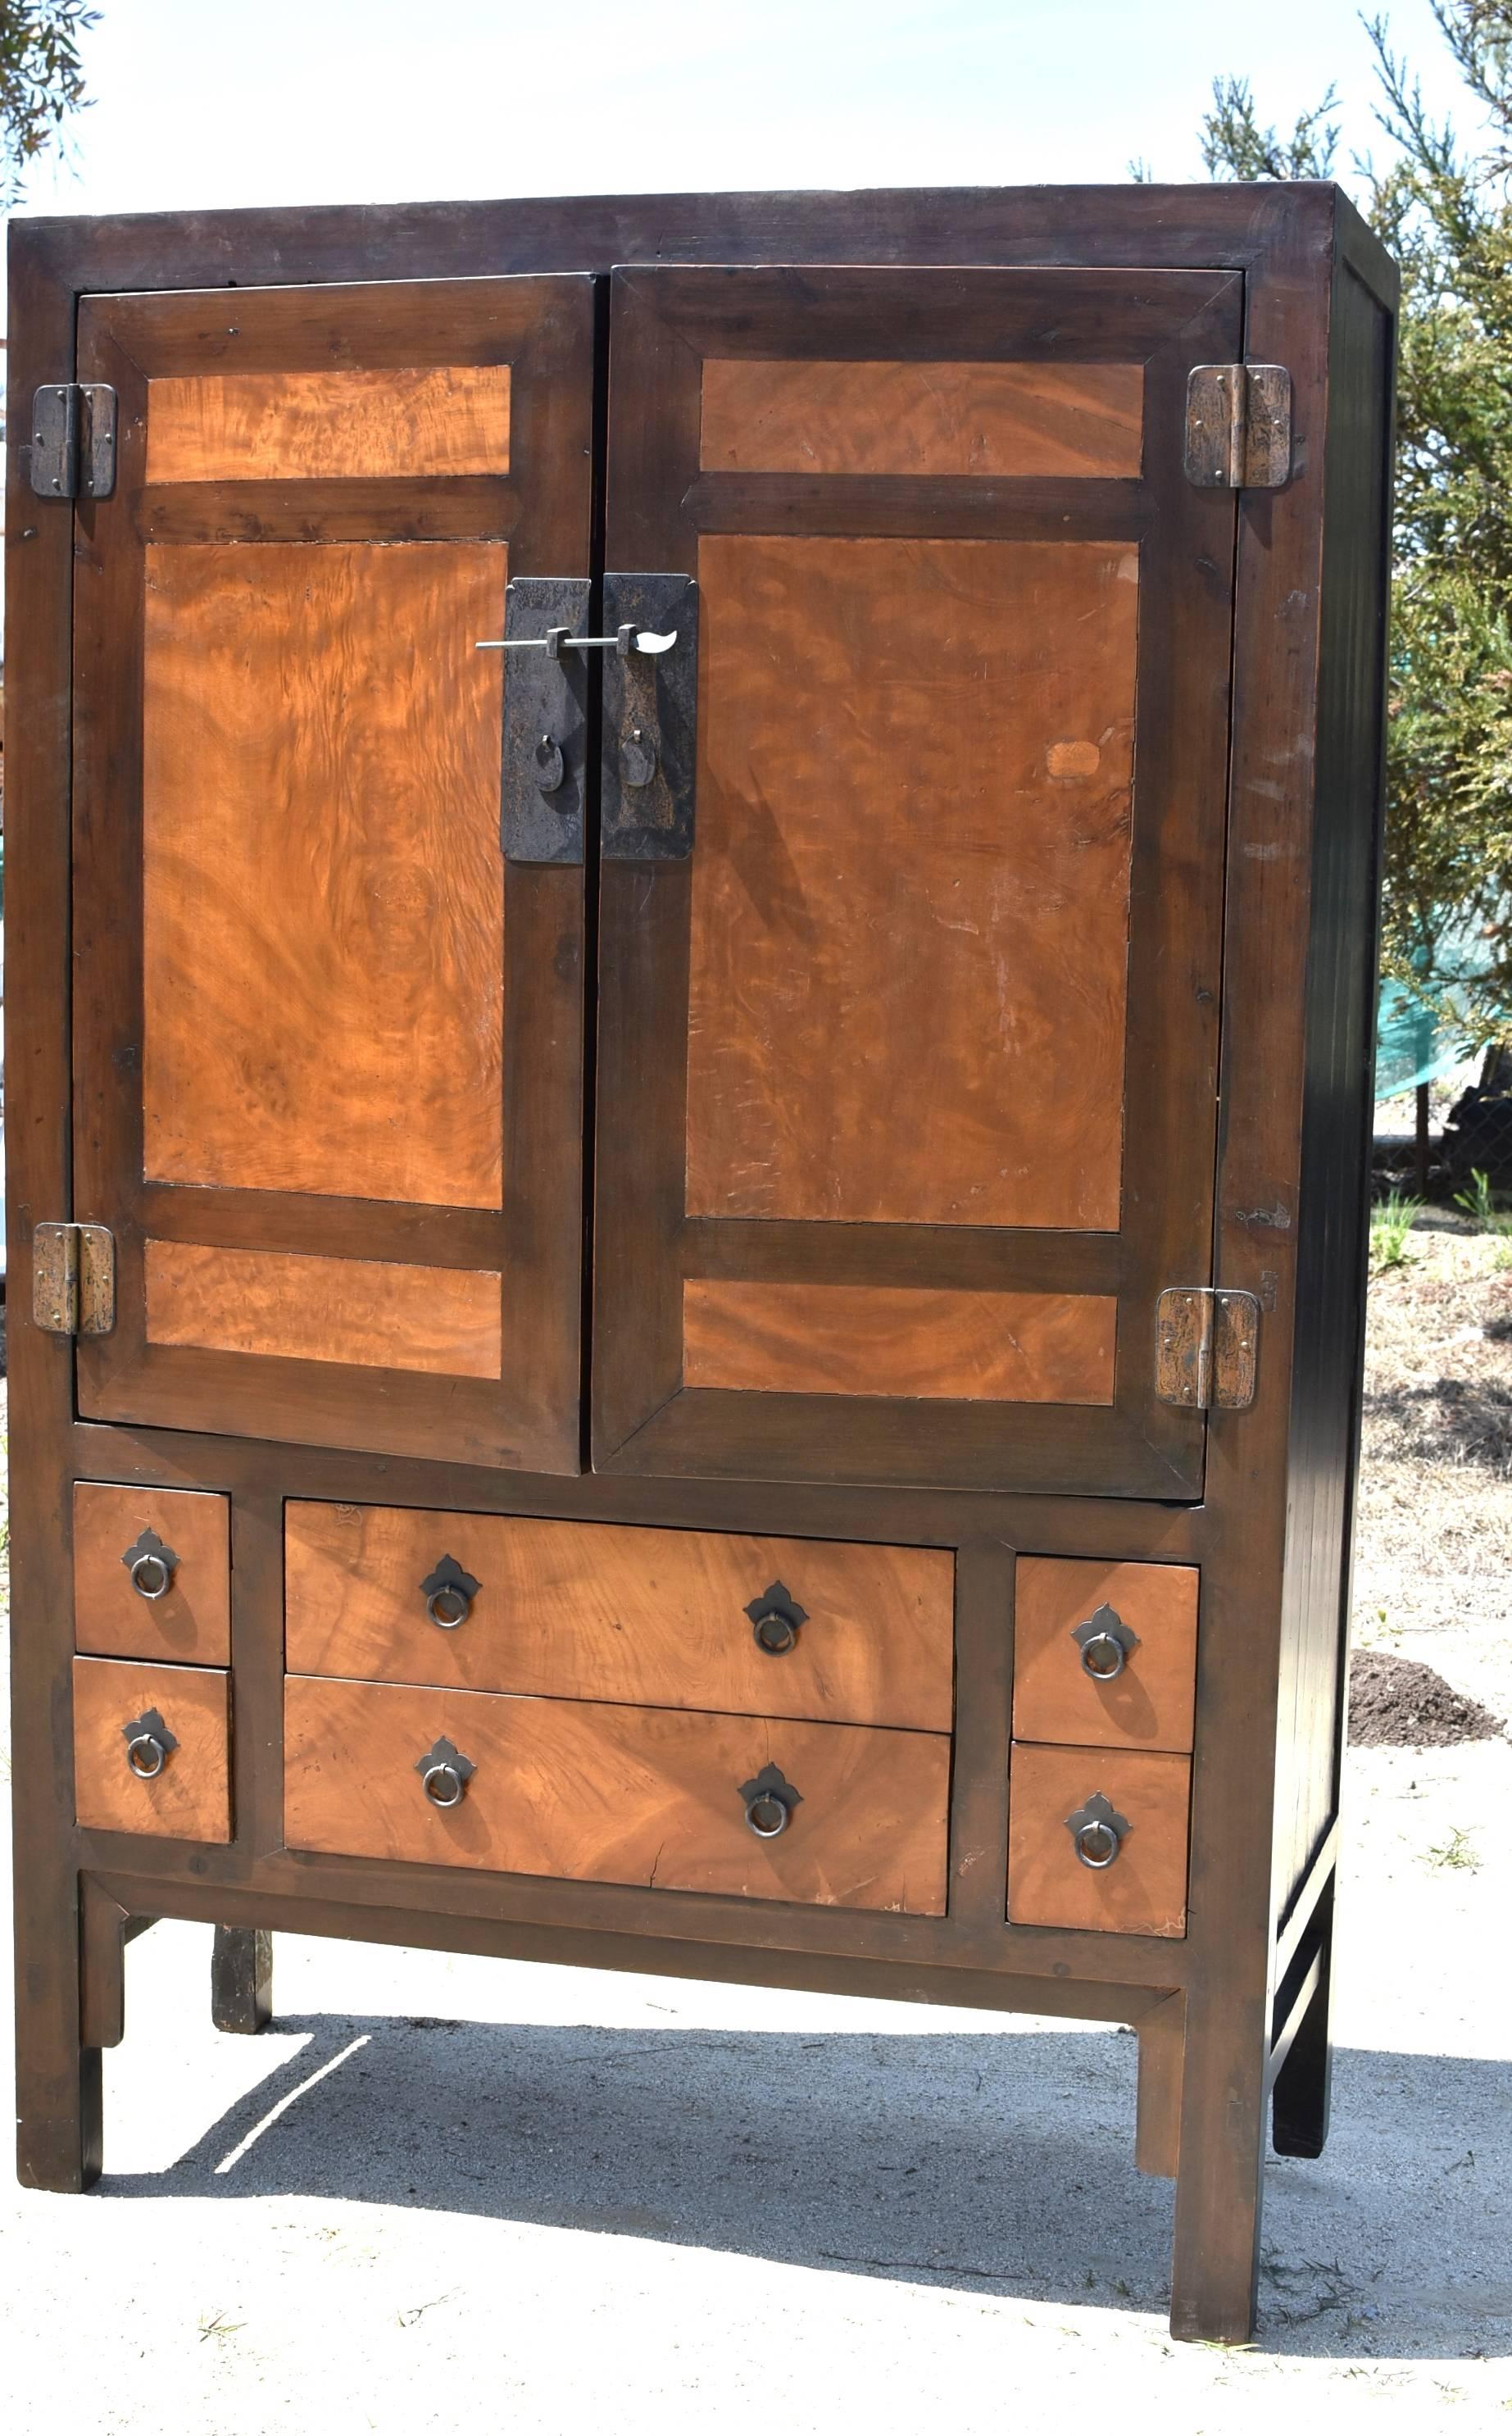 Blowout sale! A very large burl wood cabinet. The burl wood has beautiful swirling patterns. The contrast of burl's gold and framework's brown is elegant and stunning. Solid brass hardware. Six drawers, a removable shelf and a solid wood hanging rod